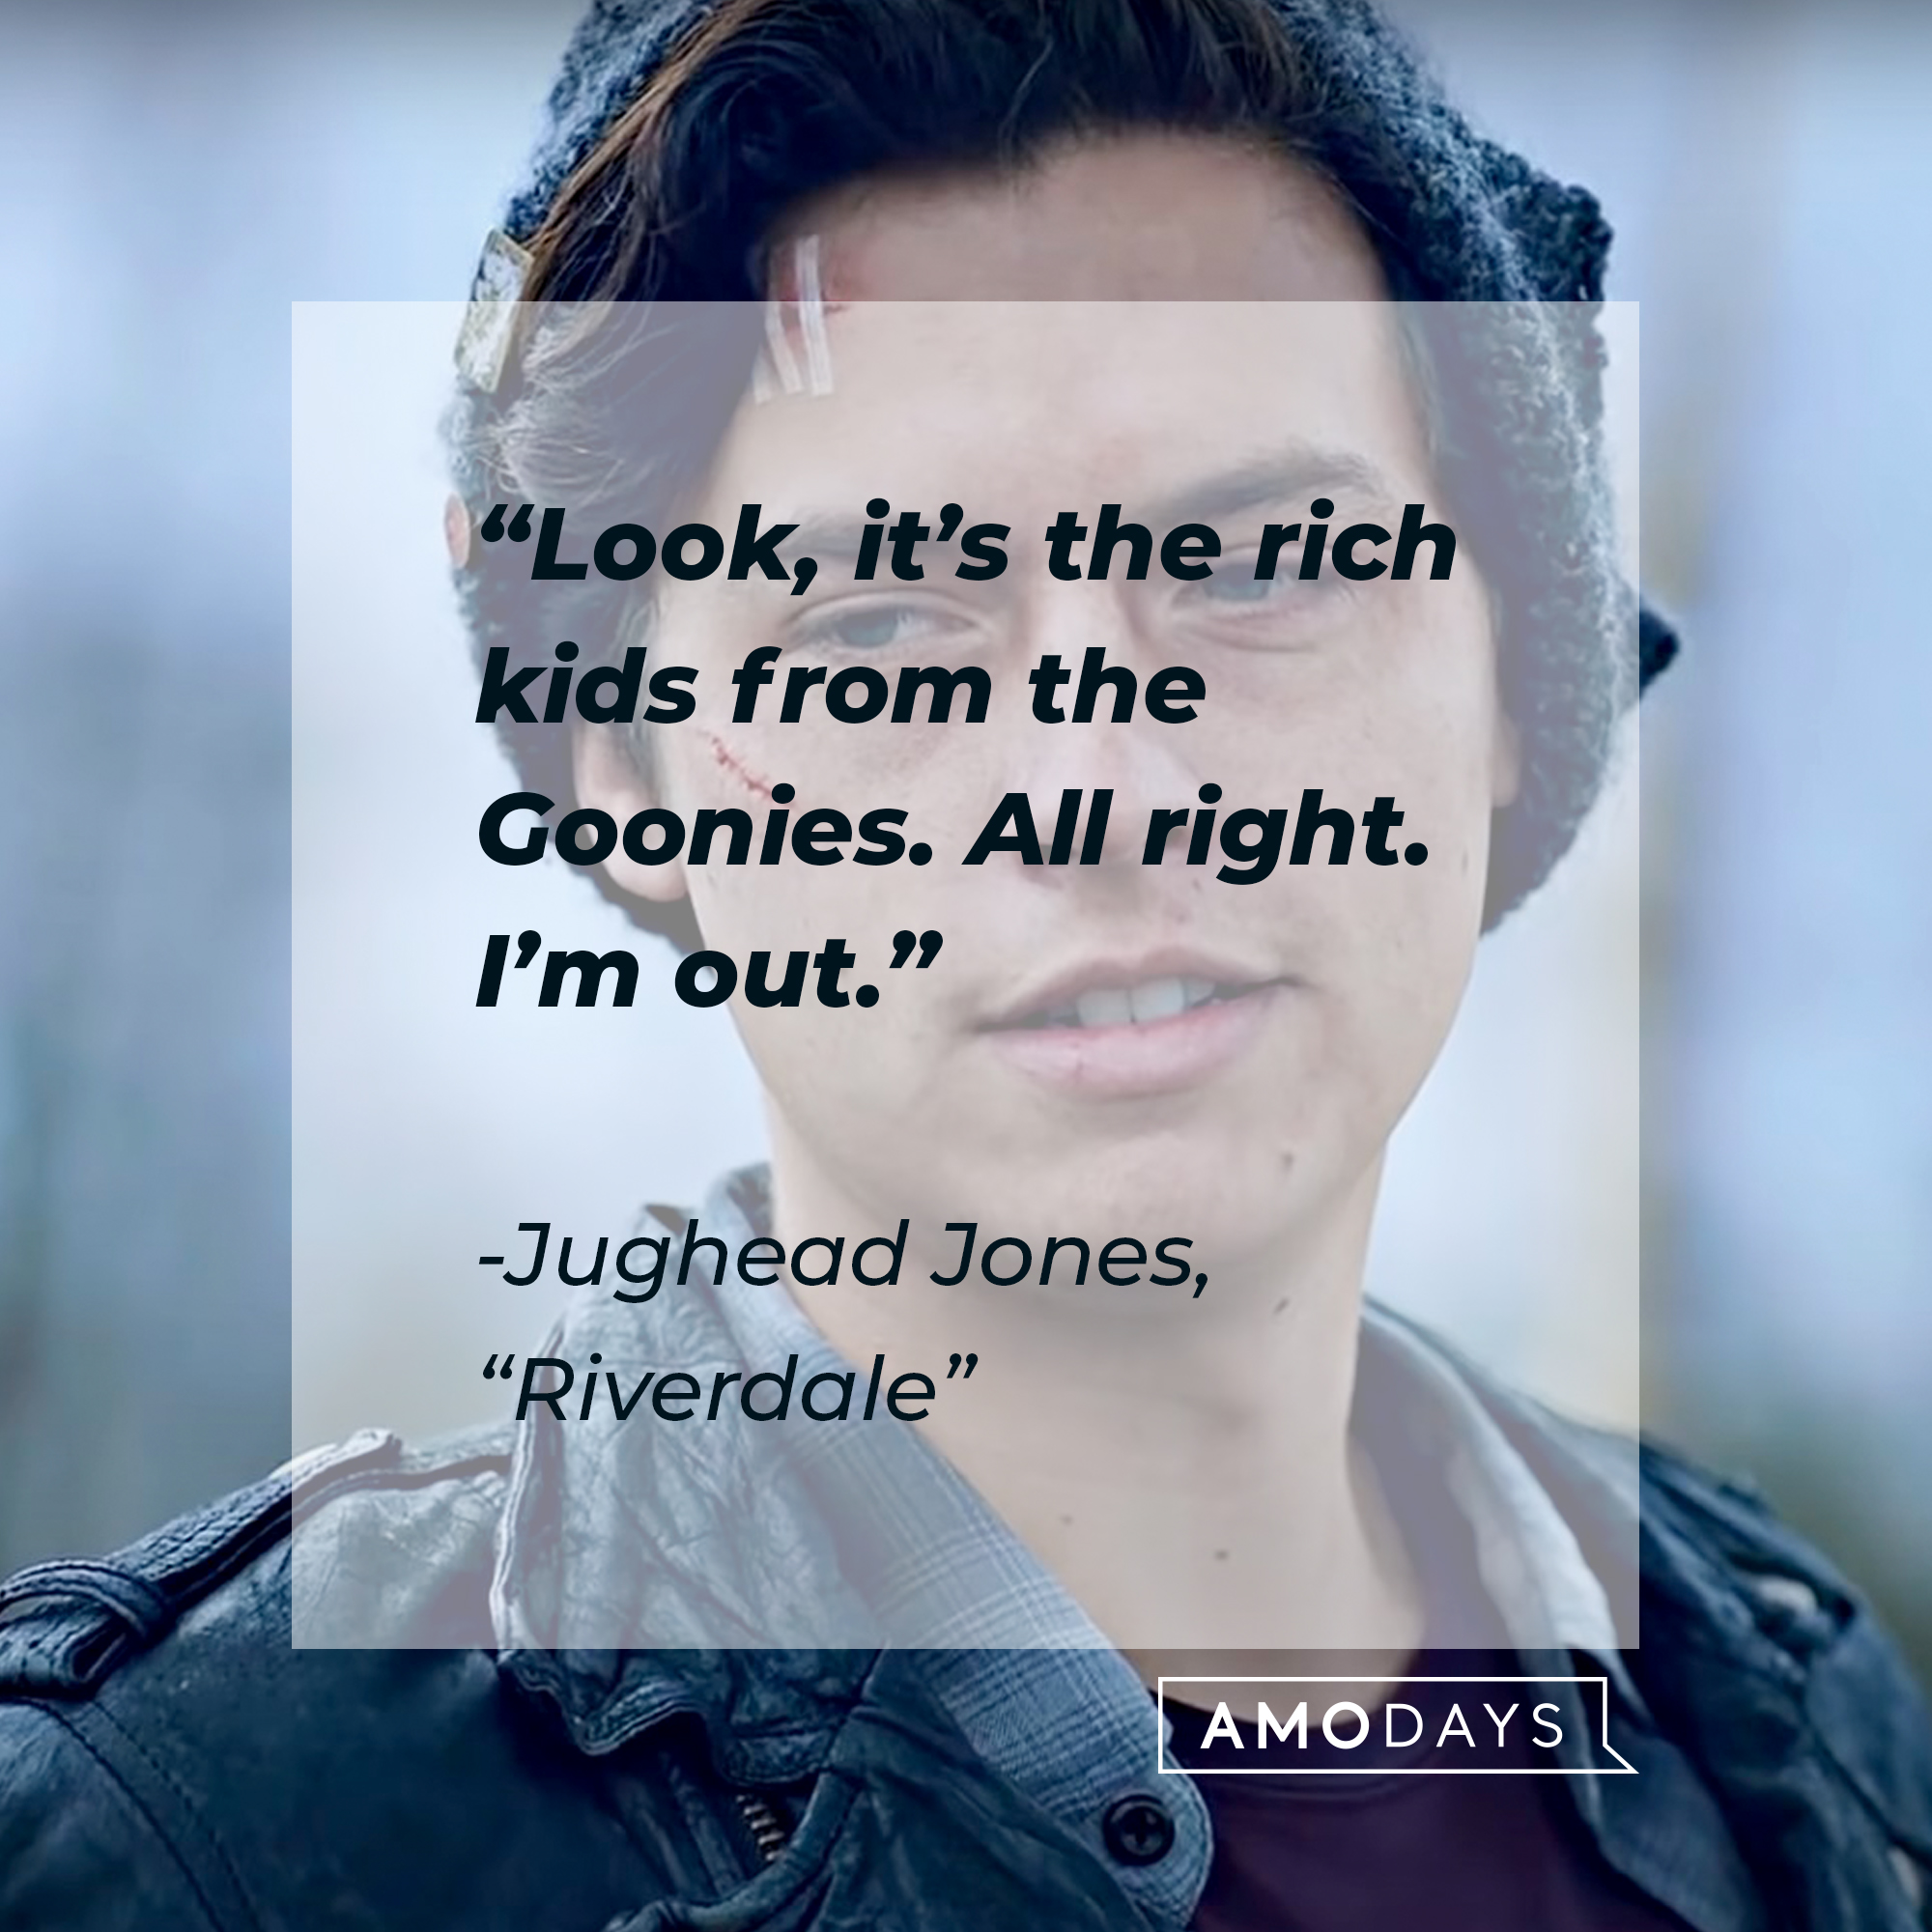 Image of Cole Sprouse as Judhead Jones in "Riverdale" with the quote: Look, it’s the rich kids from the Goonies. All right. I’m out.” | Source: facebook.com/Riverdale